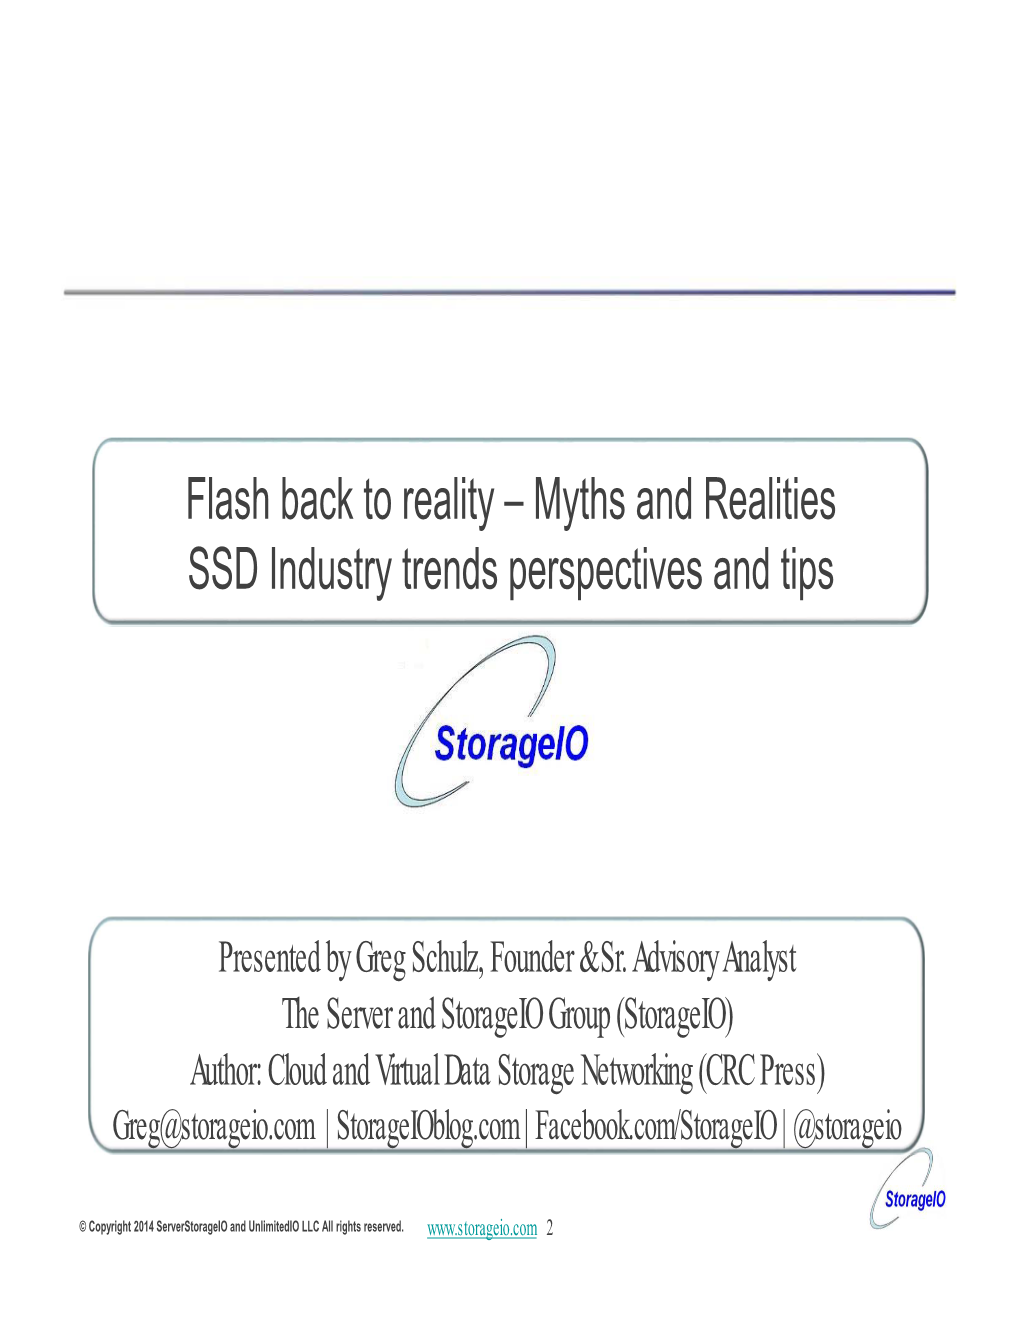 Myths and Realities: SSD Industry Trends and Perspectives and Tips